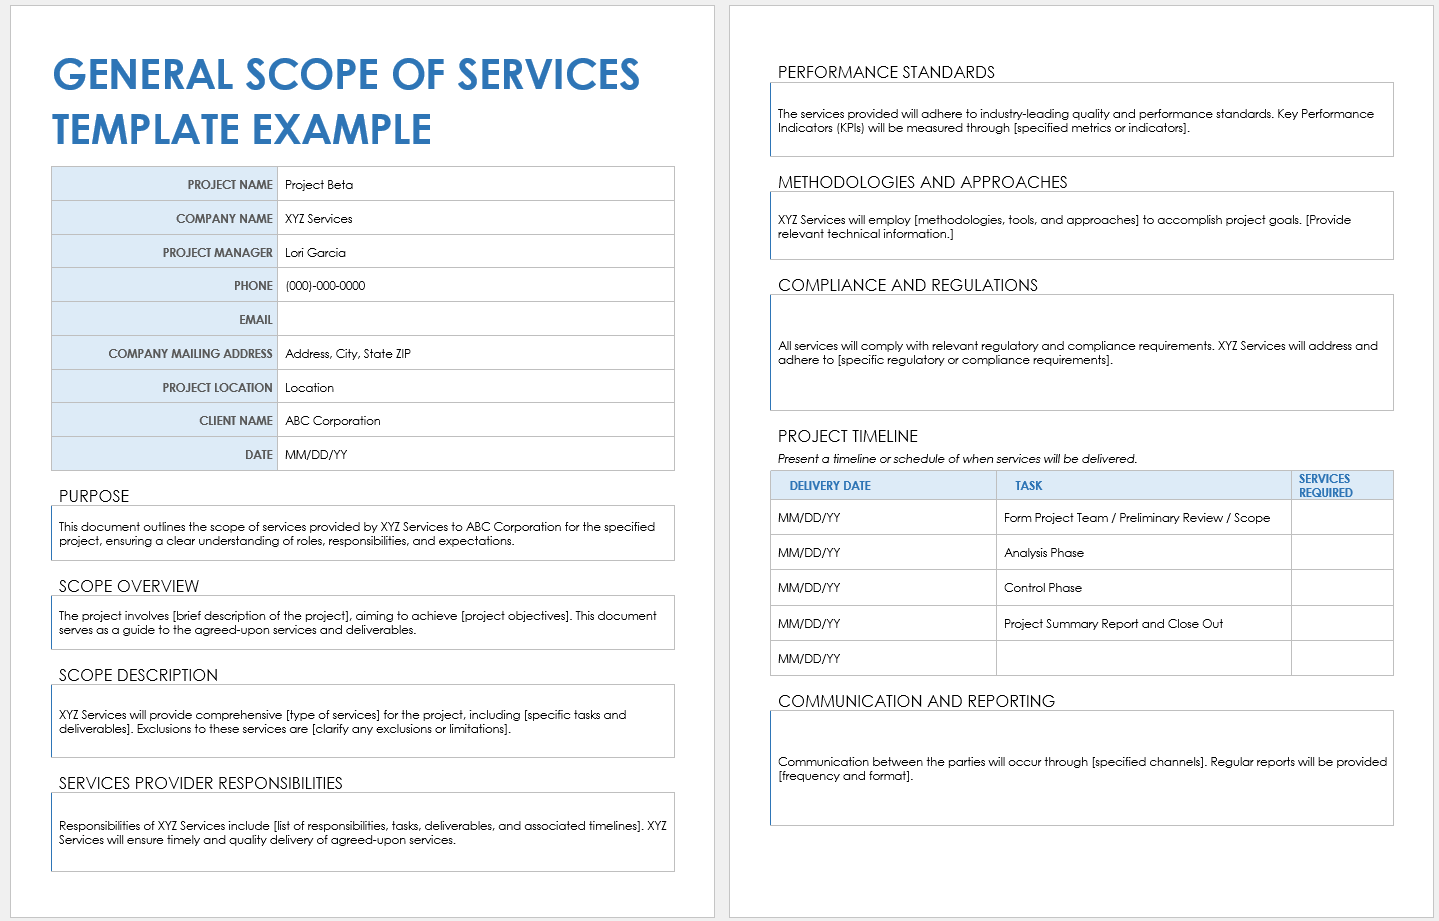 General Scope of Services Example Template